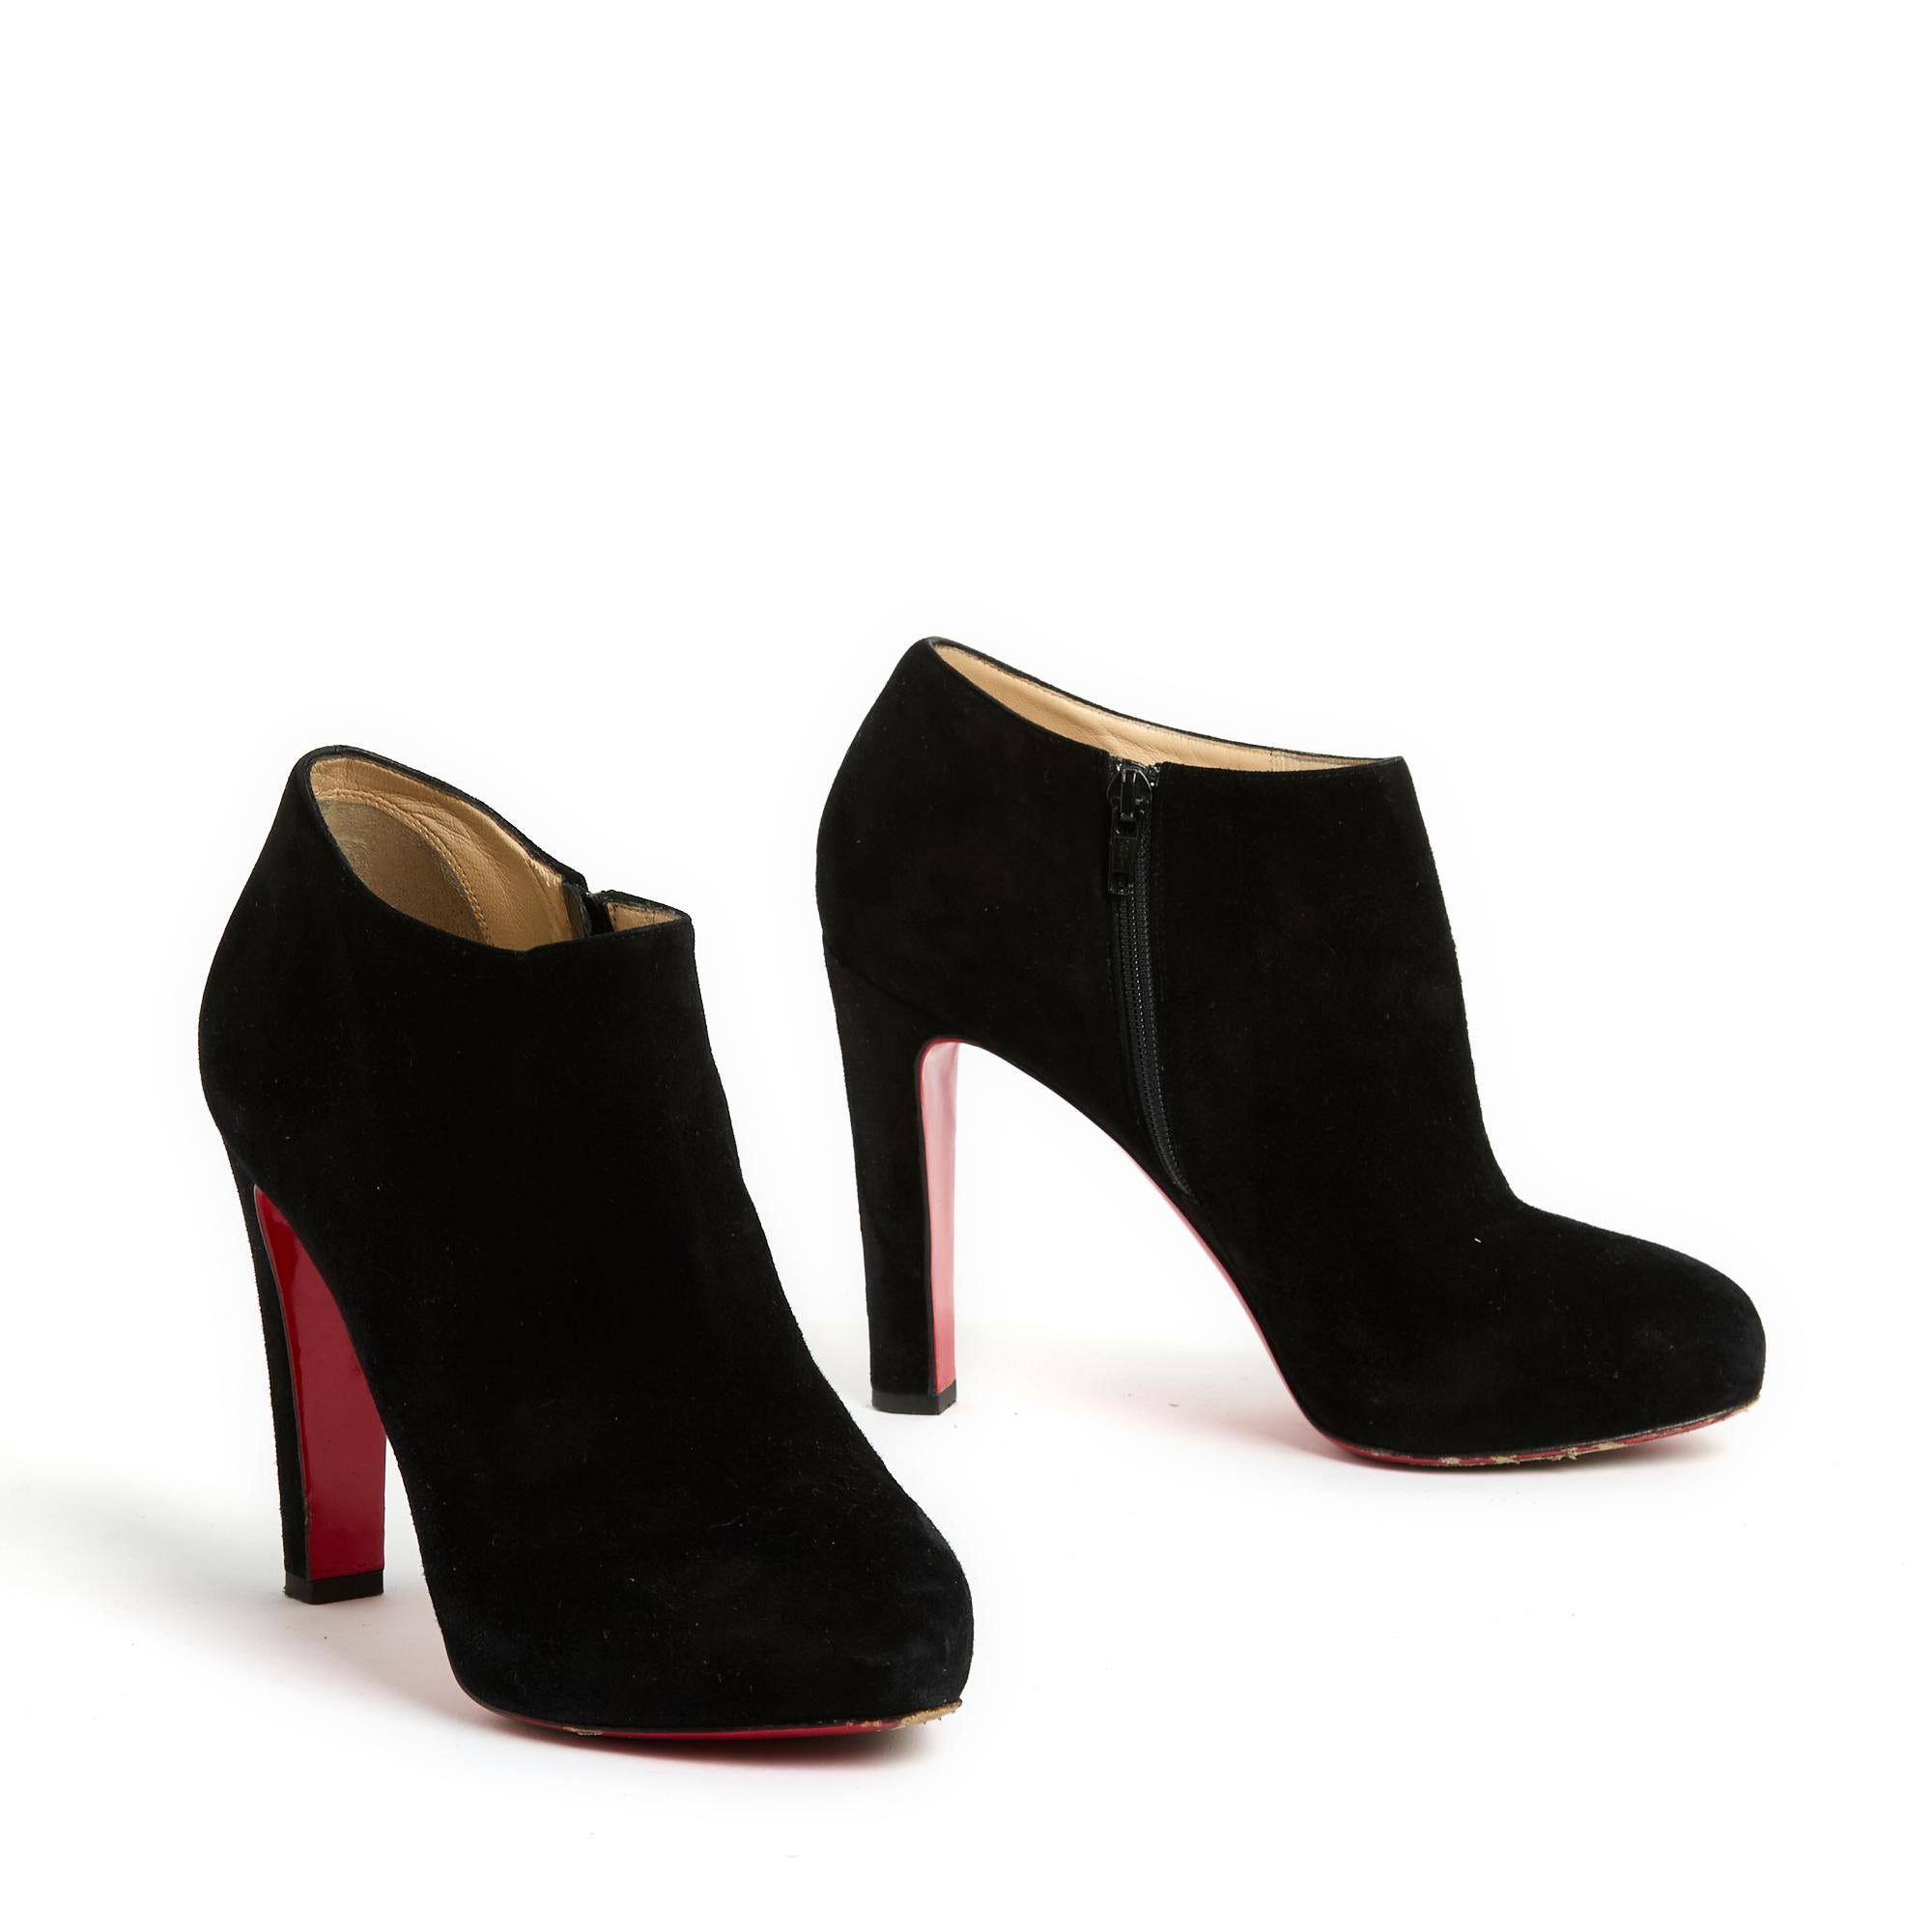 Christian Louboutin ankle boots in black suede, straight heel and small platform in front, almond toe. Size 39FR, i.e. UK5.5 and US7.5, heel 12 cm, front sole 2 cm, insole 25 cm. The boots have been worn but they are in perfect condition,